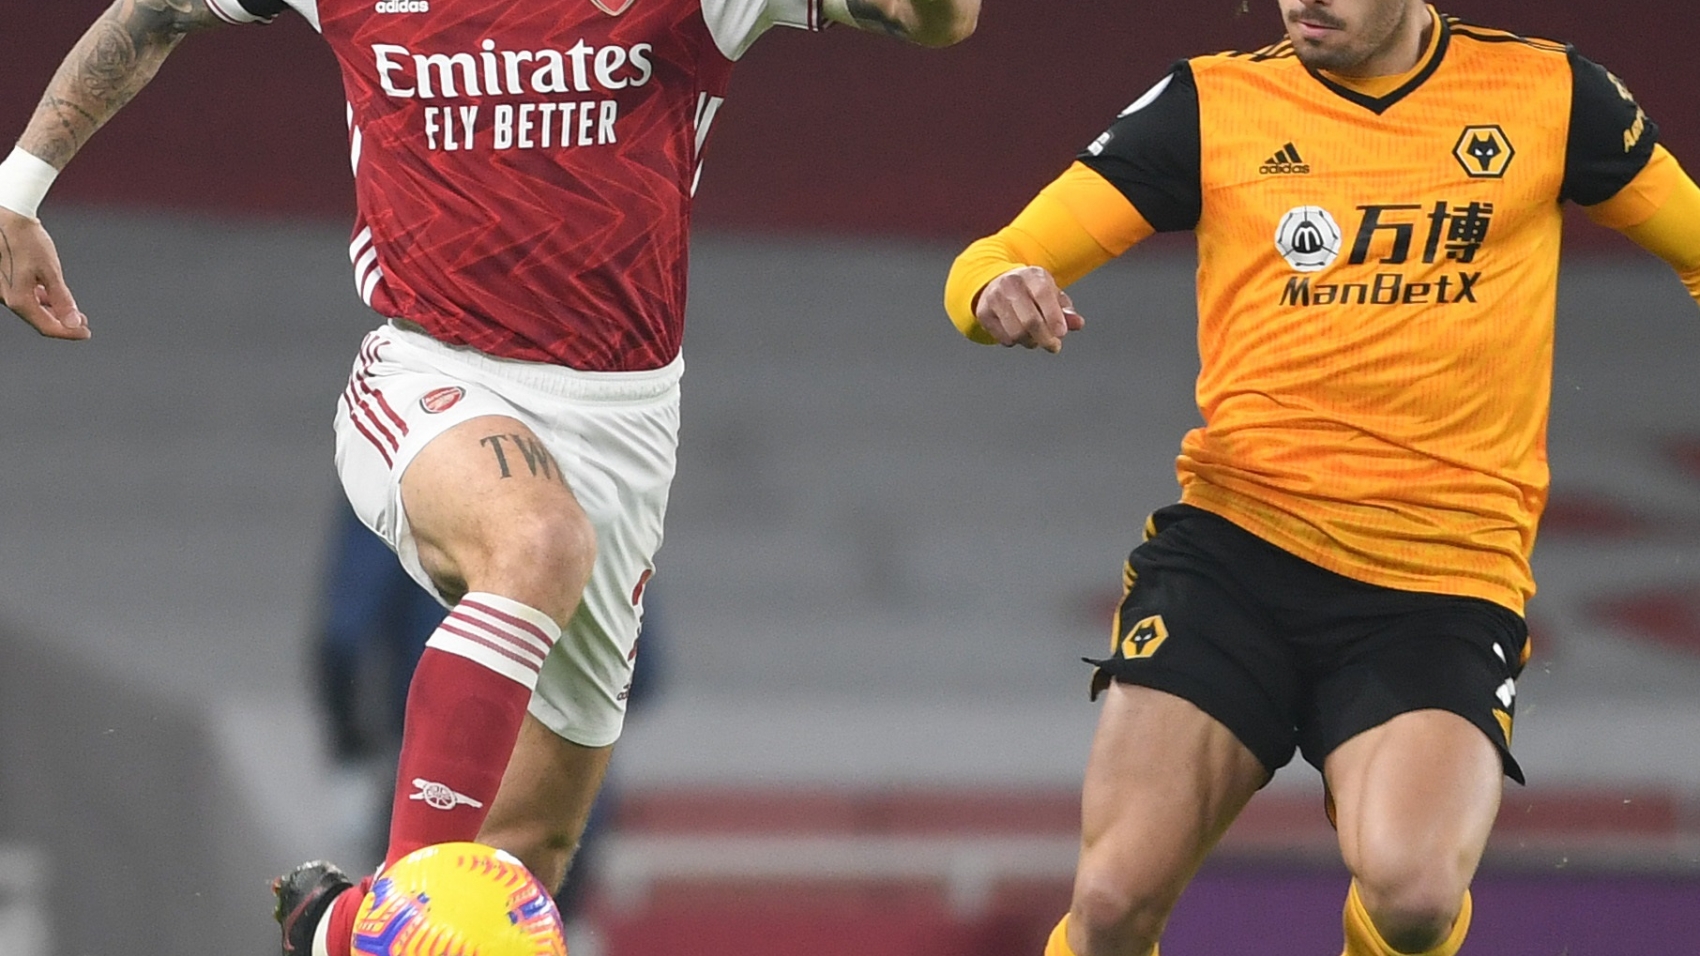 LONDON, ENGLAND - NOVEMBER 29: Hector Bellerin of Arsenal takes on Pedro Neto of Wolves during the Premier League match between Arsenal and Wolverhampton Wanderers at Emirates Stadium on November 29, 2020 in London, England. Sporting stadiums around the UK remain under strict restrictions due to the Coronavirus Pandemic as Government social distancing laws prohibit fans inside venues resulting in games being played behind closed doors. (Photo by David Price/Arsenal FC via Getty Images)